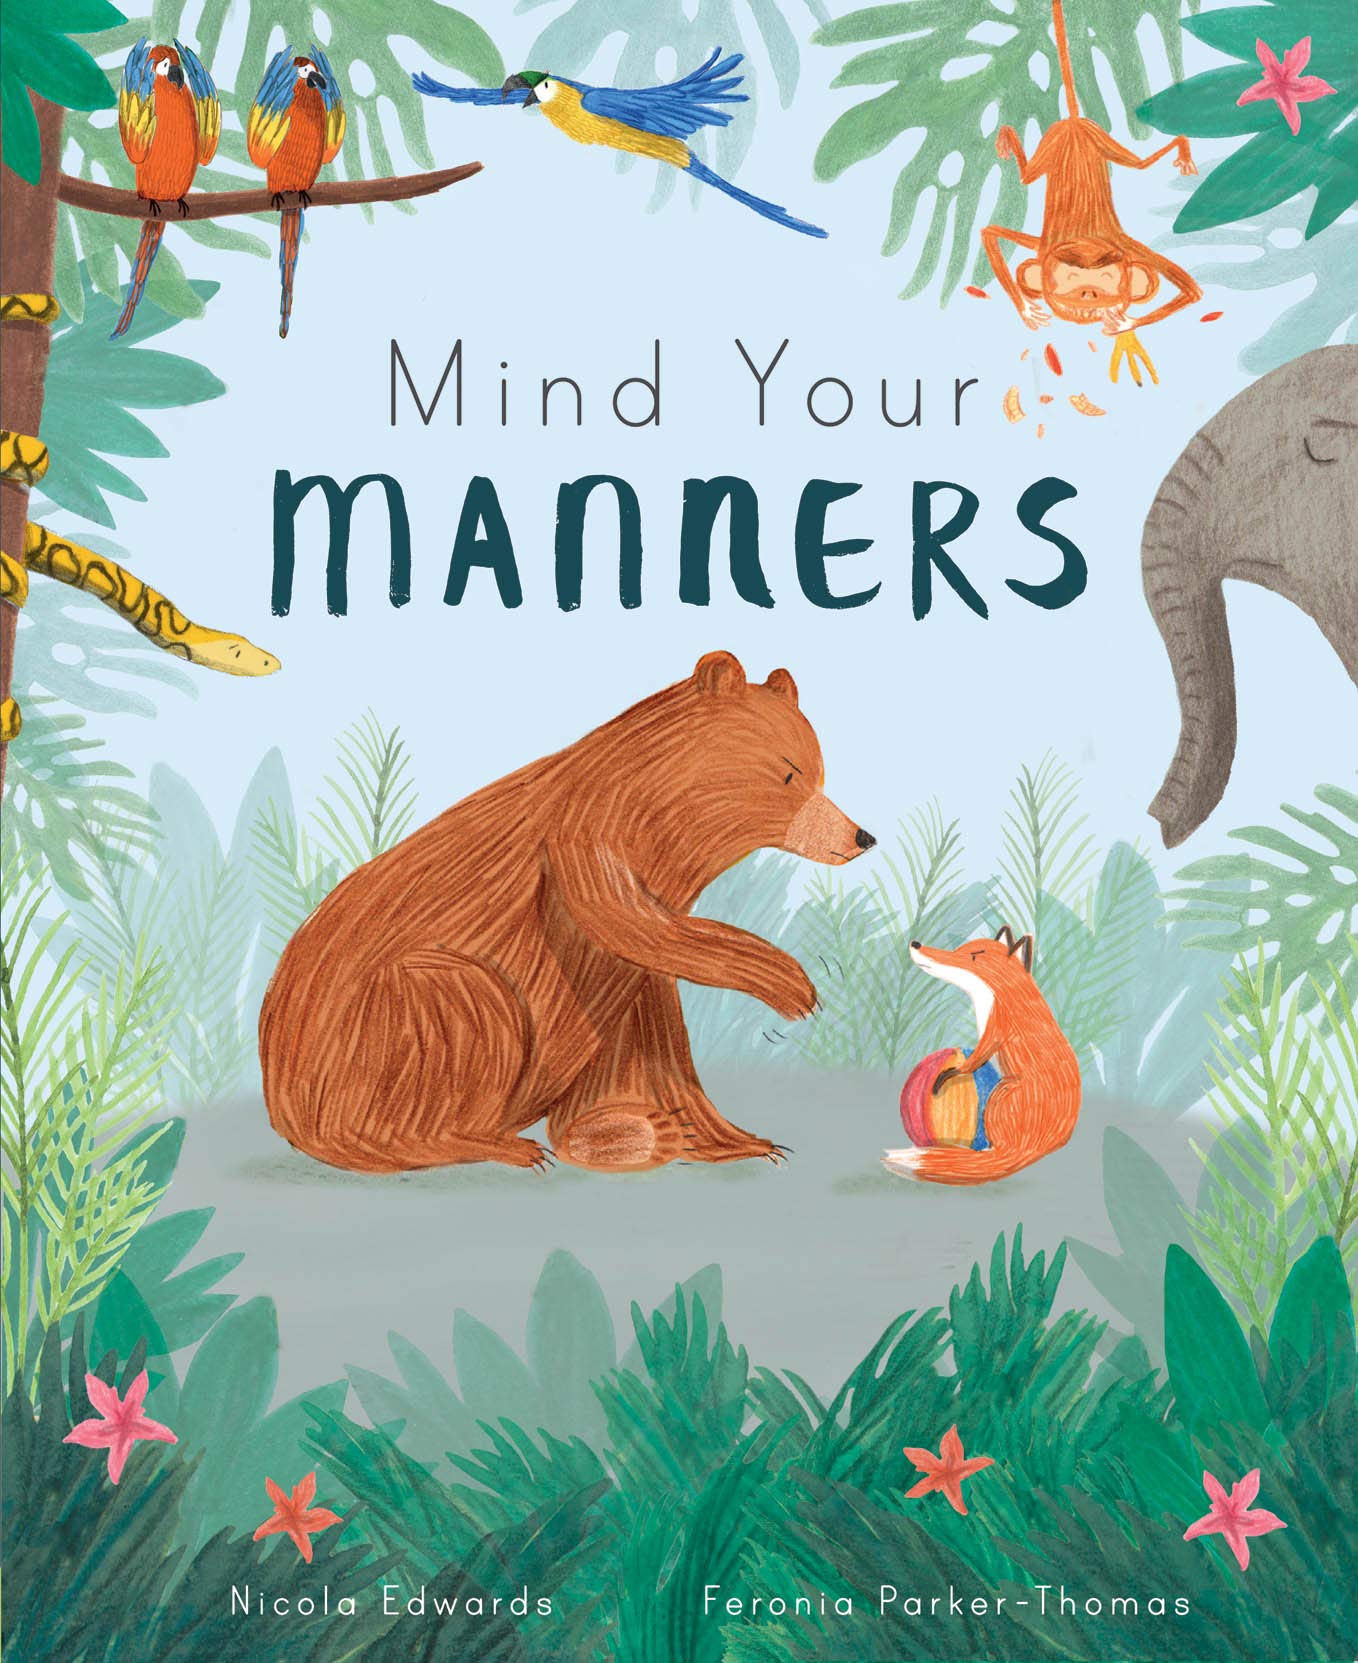 Mind Your Manners by Nicola Edwards